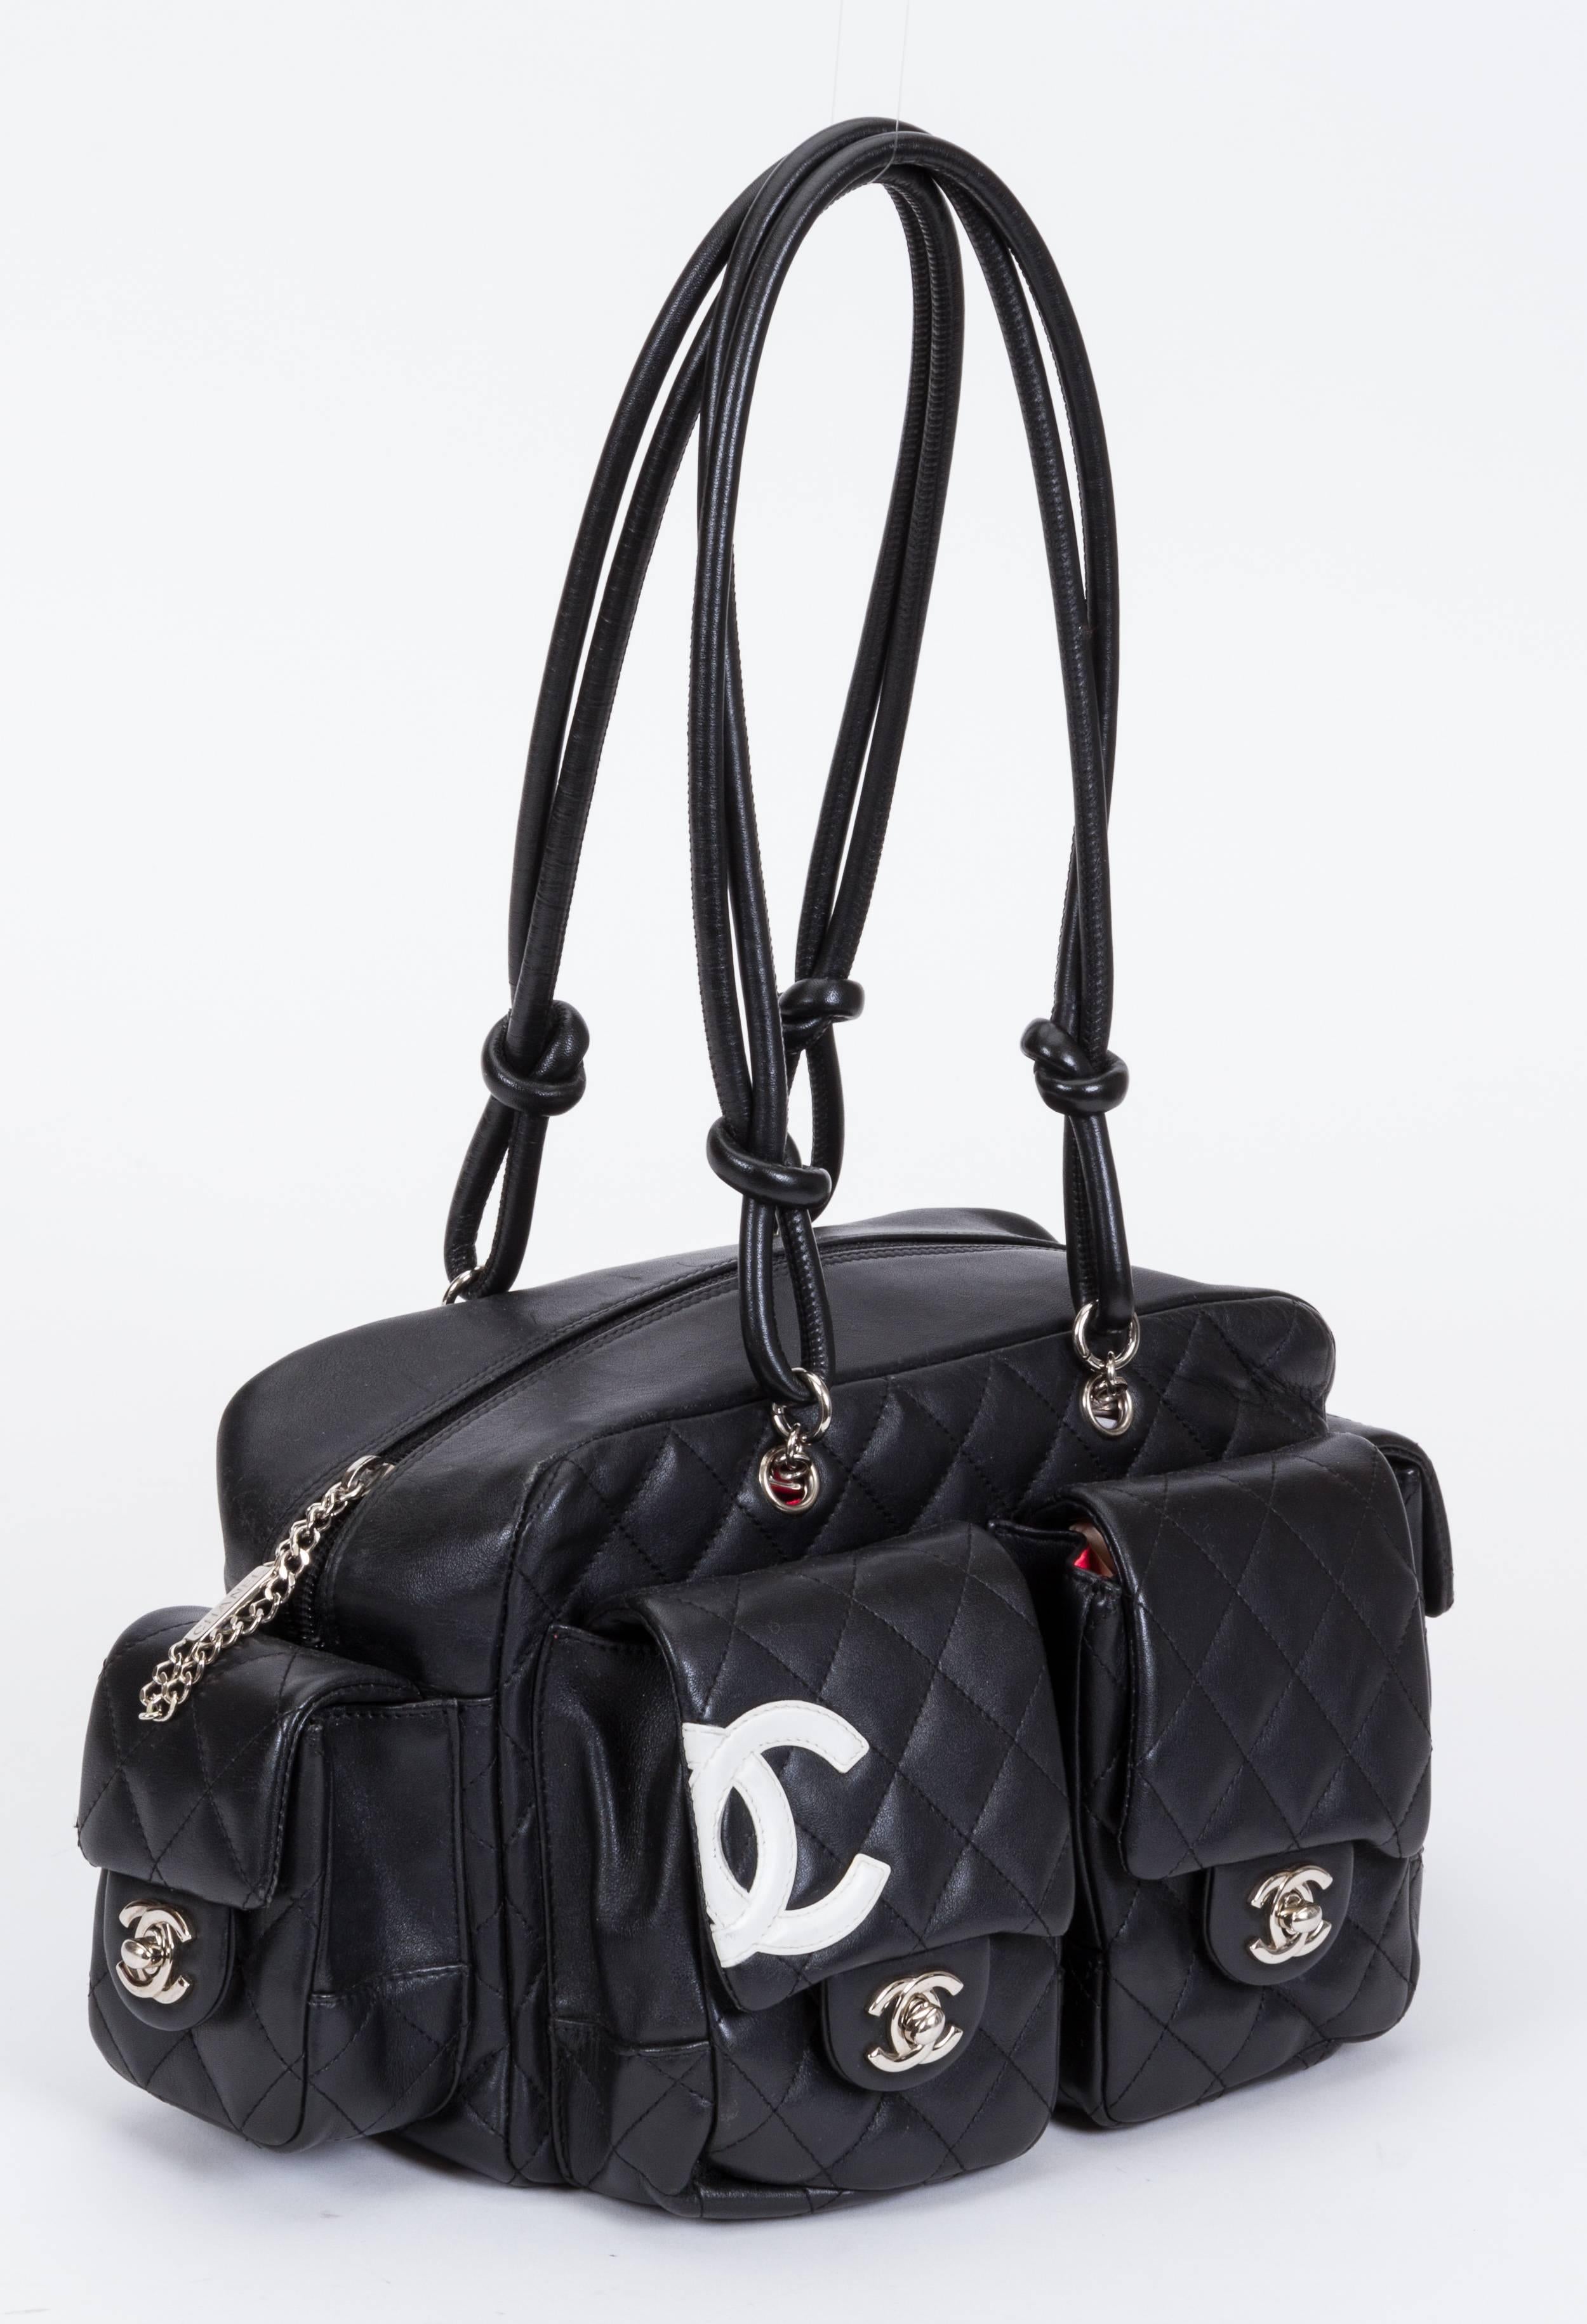 Chanel black lambskin reporter bag with white logo . Collection 2005/2006. Shoulder drop, 10"L. Comes with hologram and non Chanel dust cover.